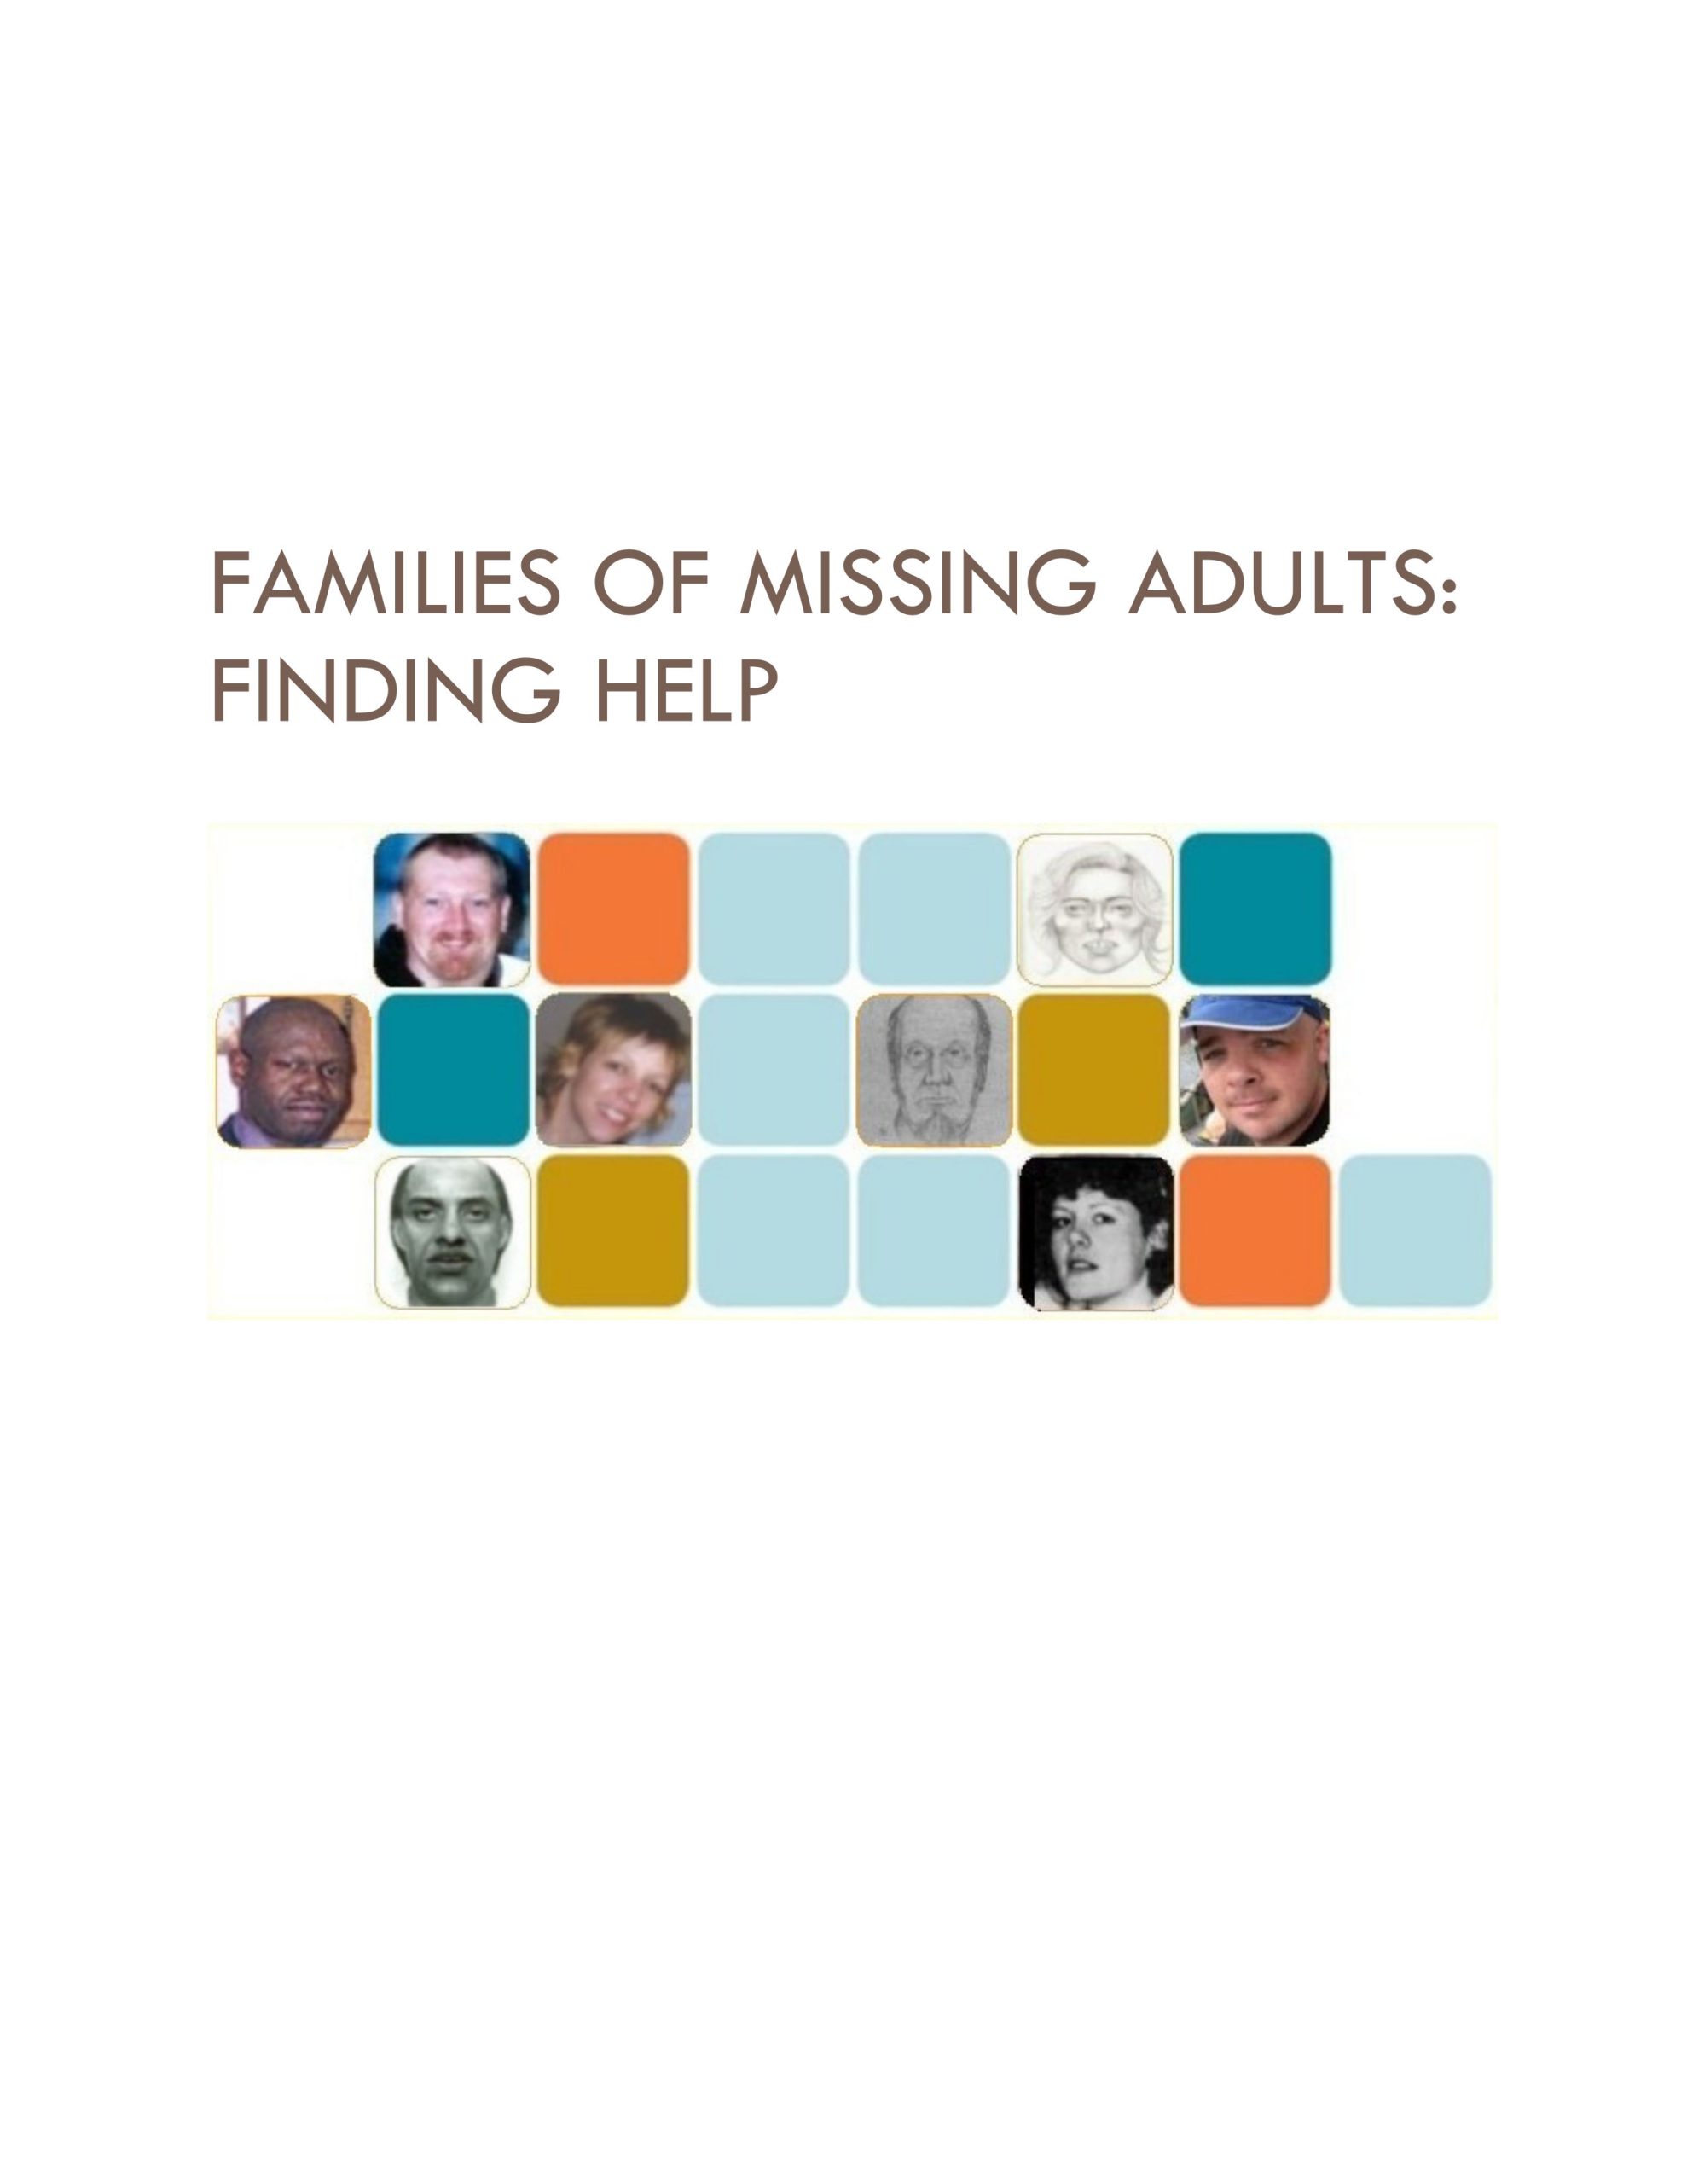 Cover of the guide with pictures of missing persons in boxes